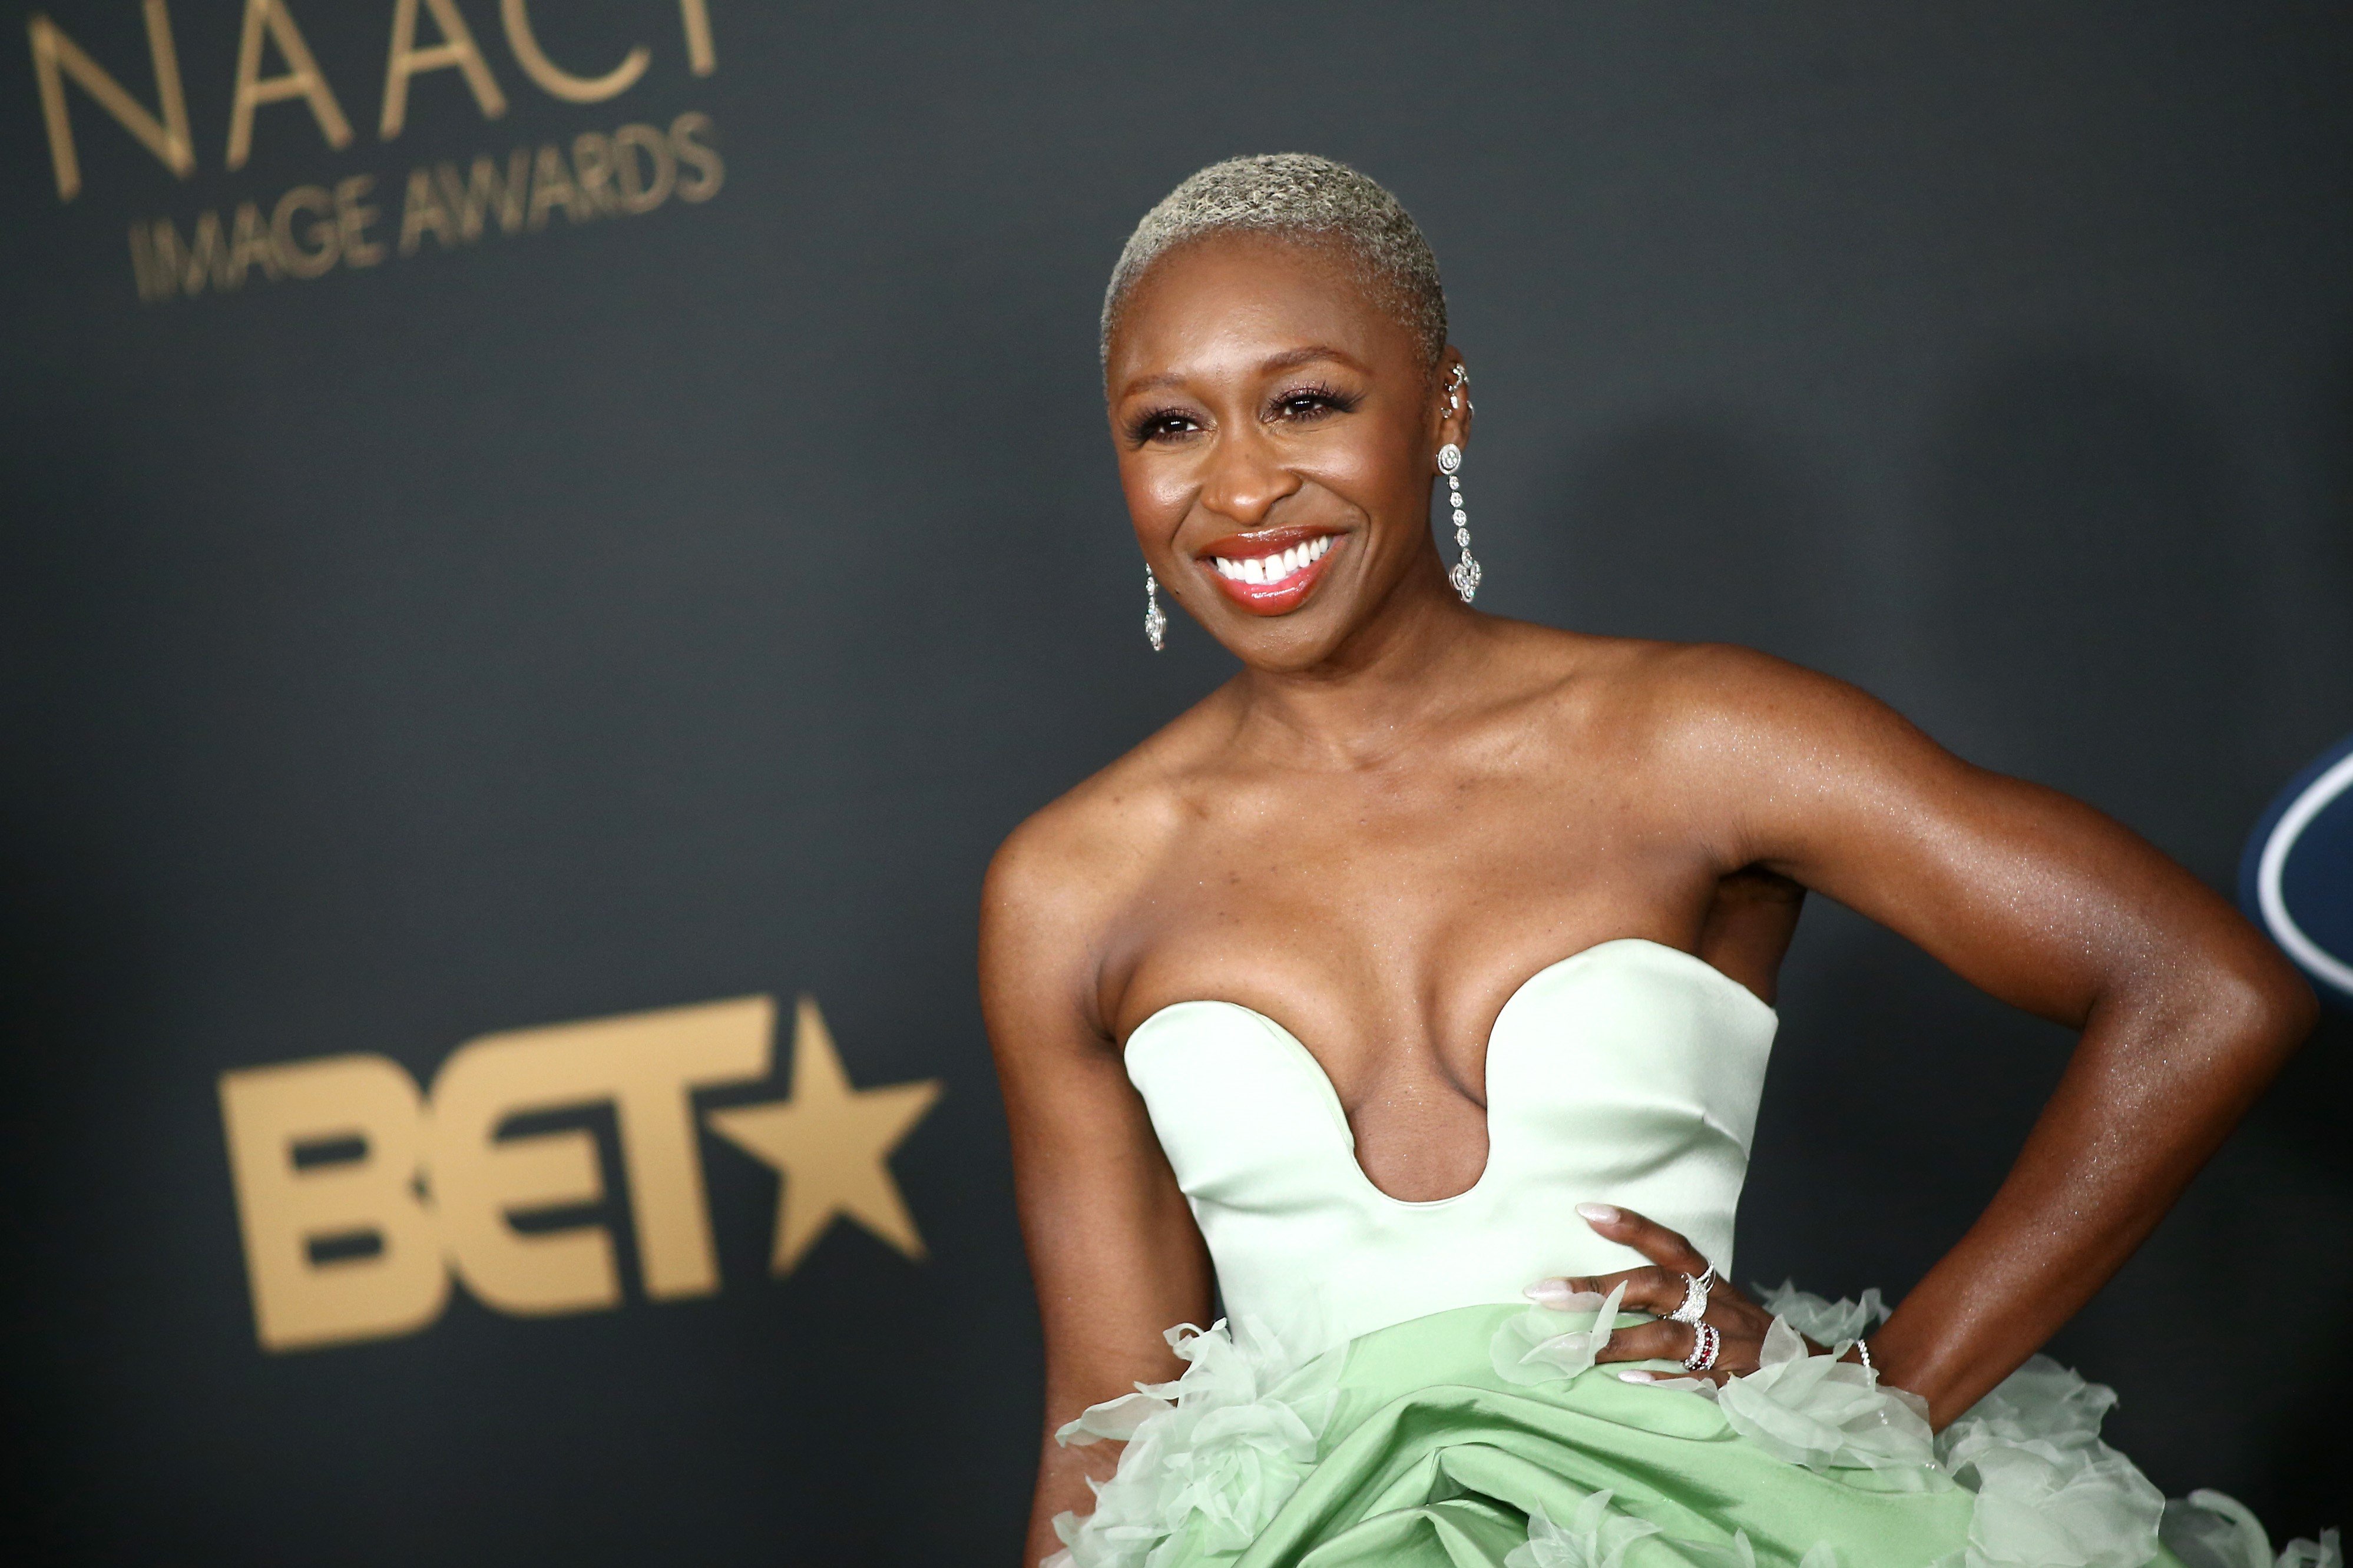 Cynthia Erivo, in a white and green gown, at the NAACP Image Awards in 2020.